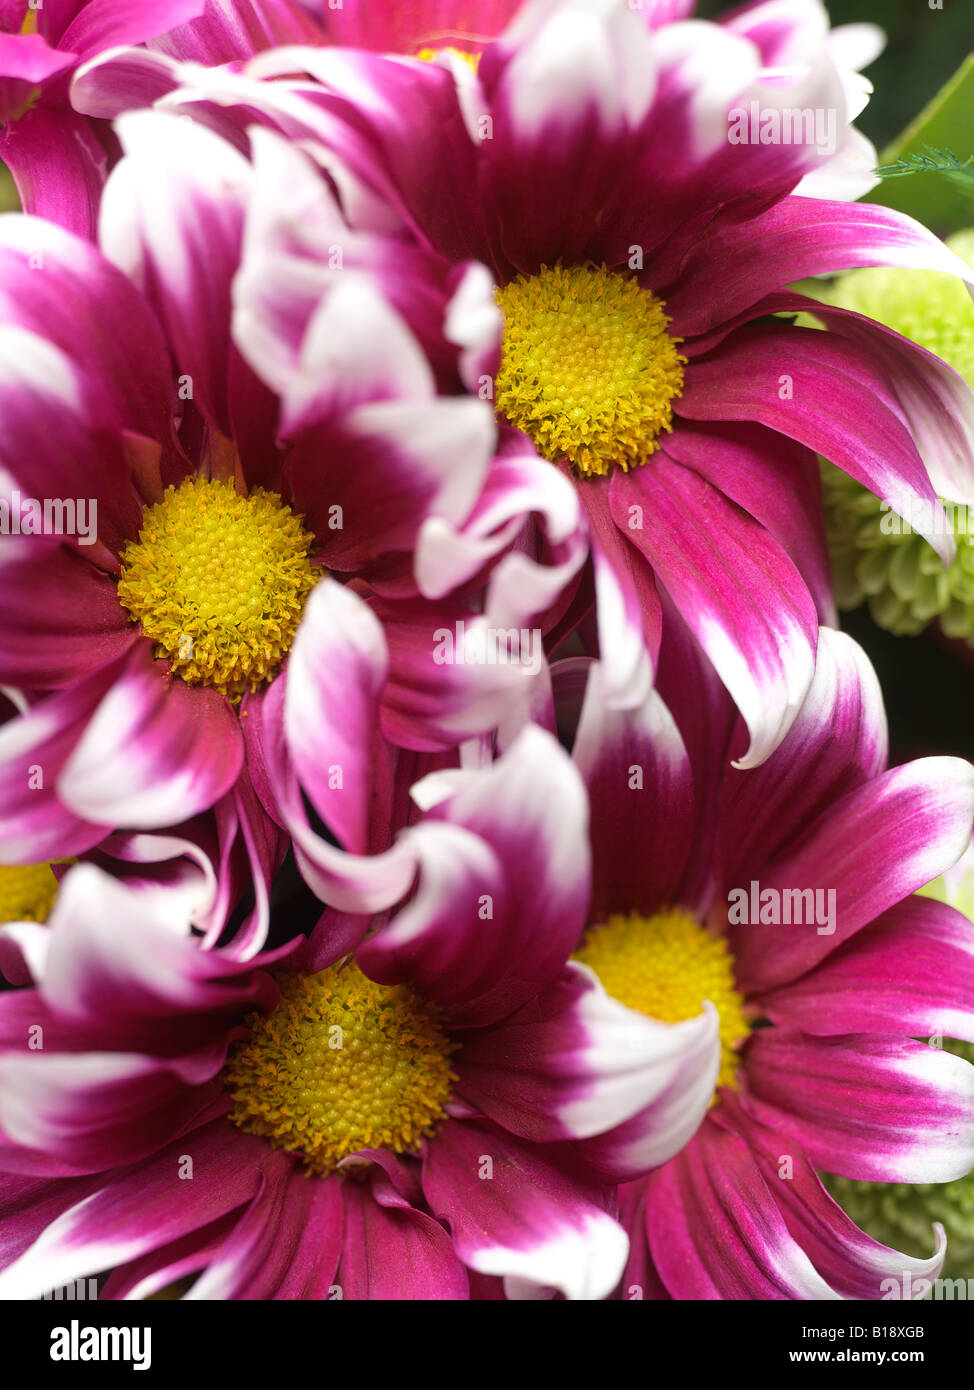 close up of  bunch of pink chrysanthemums Stock Photo